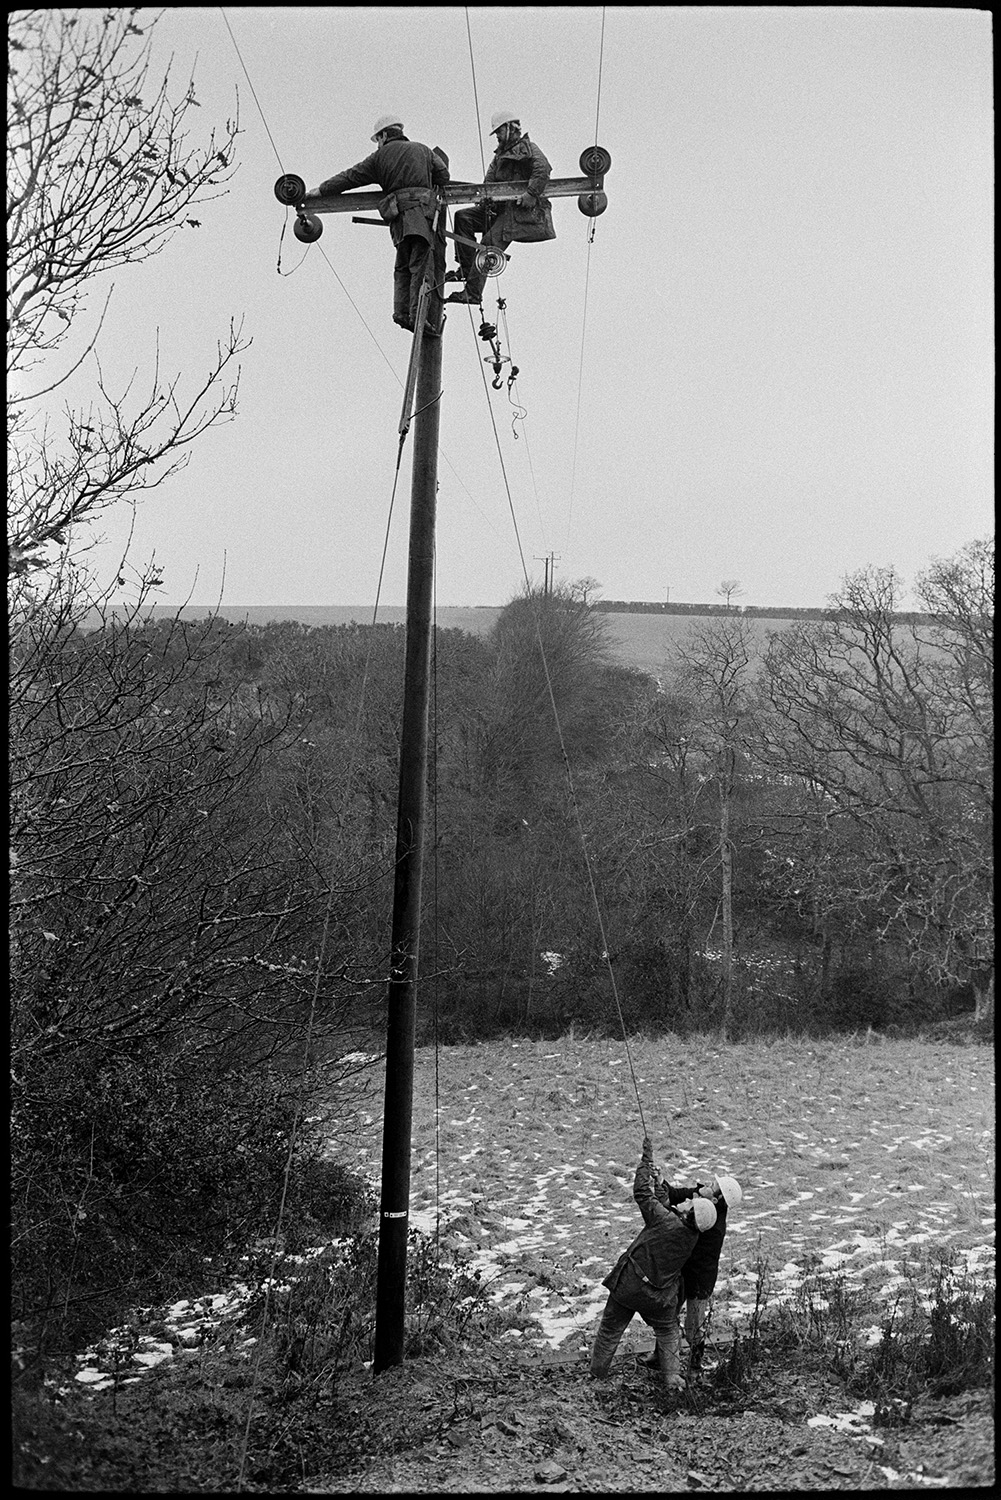 Electricity Board engineers putting up new power cables to village. 
[Men from SWEB putting up new electricity power cables in a field at Dolton. Two men are up the utility pole while two other men are holding a cable on the ground. Patches of snow can be seen in the field.]